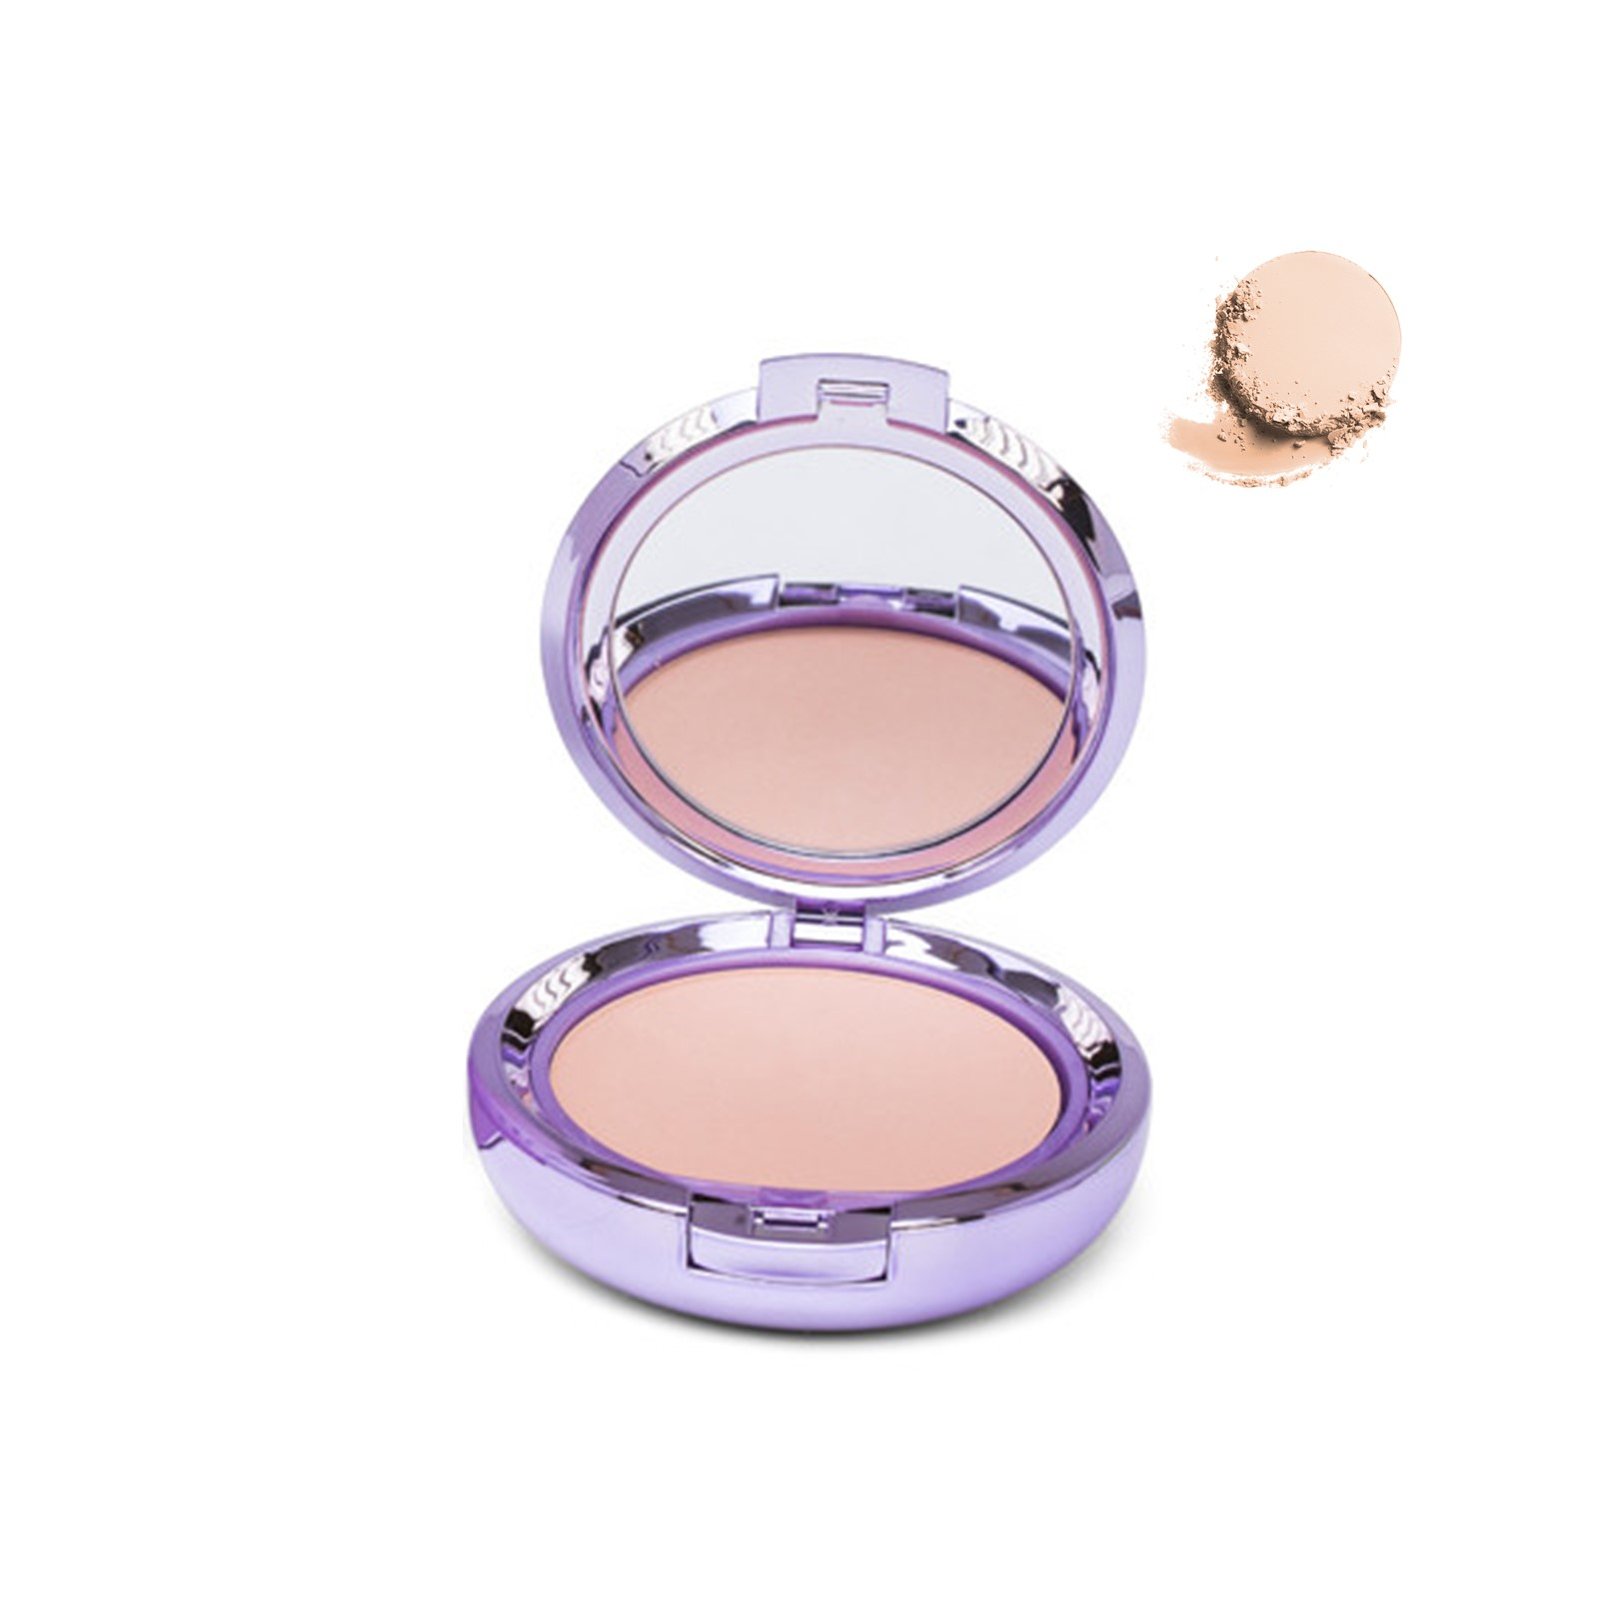 Covermark Compact Powder Normal Skin 1A 10g